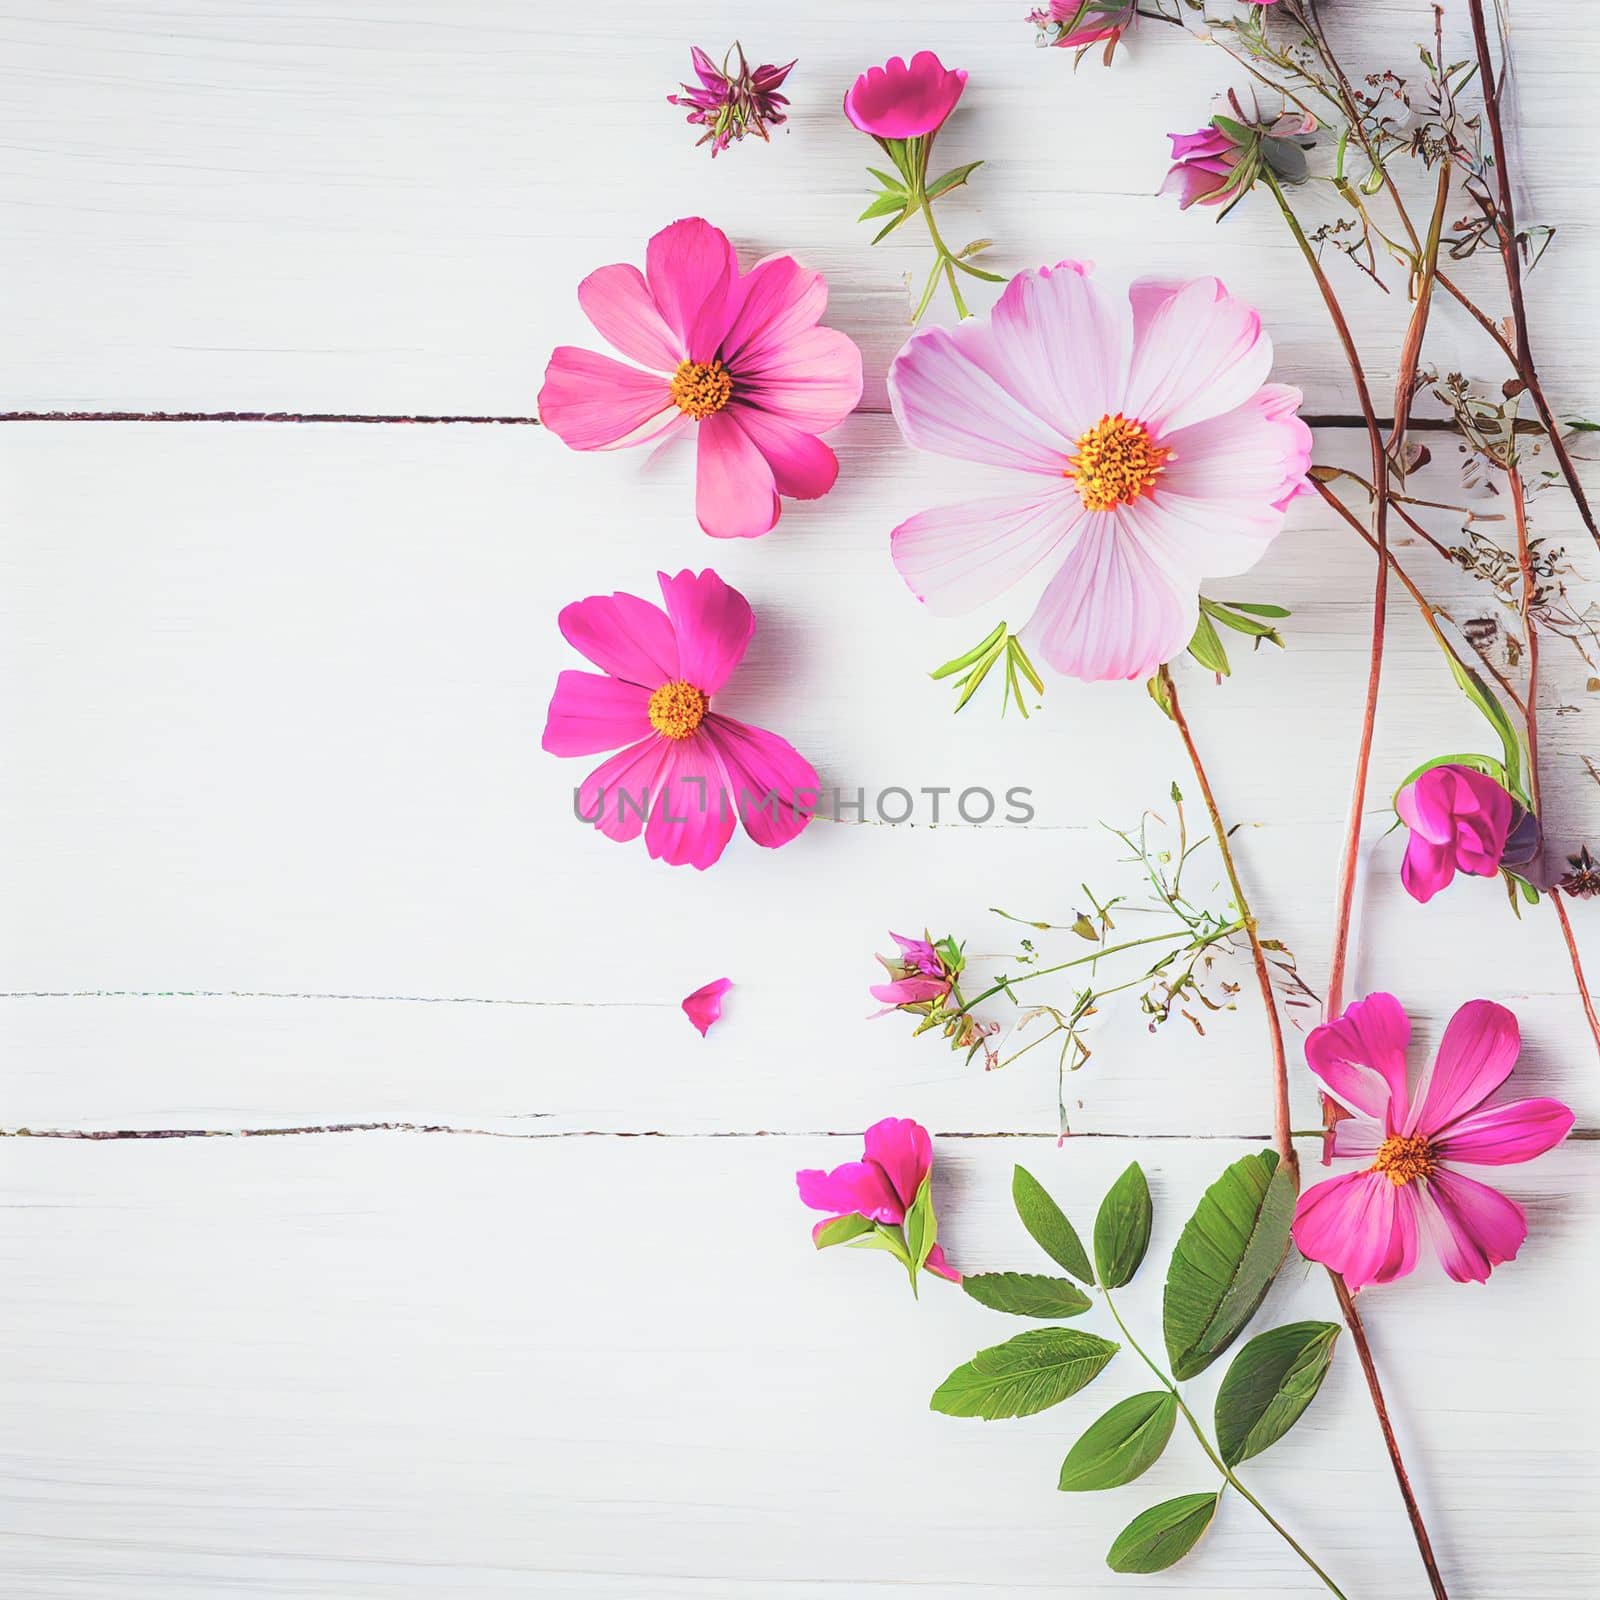 Beautiful pink flowers on white wooden background, Valentine's day concept with copy space by FokasuArt